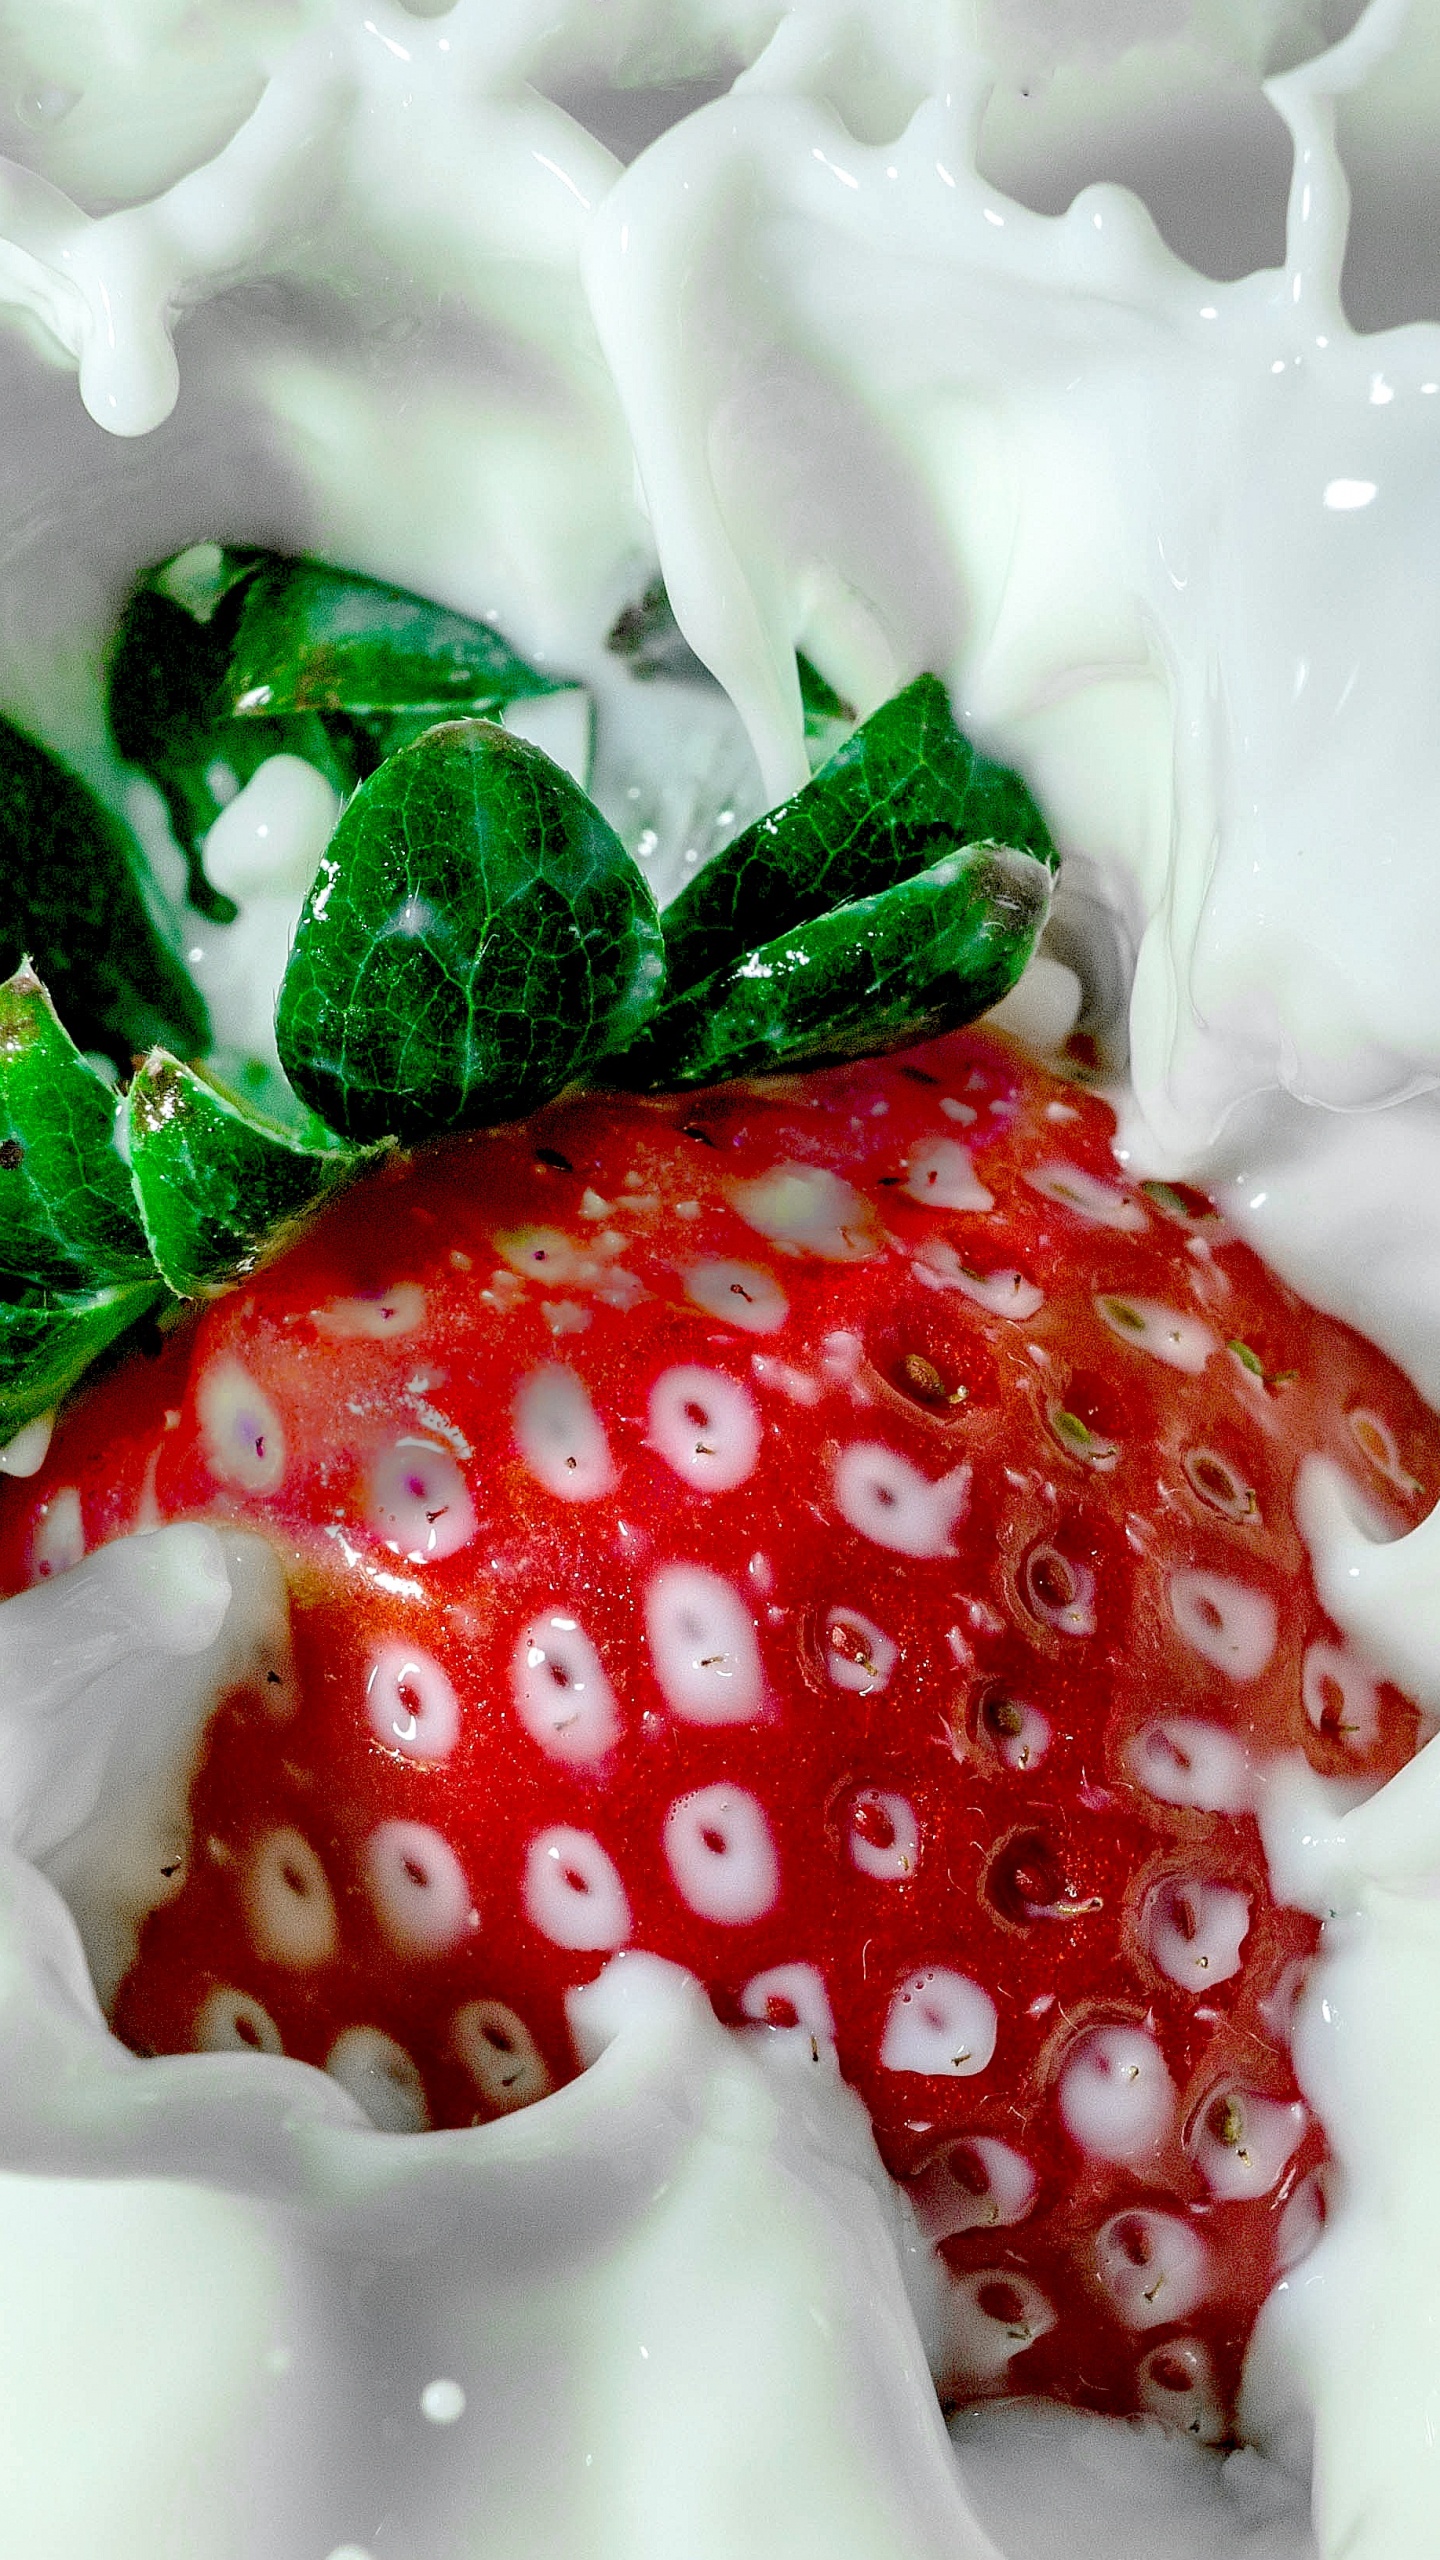 Strawberry on White Ceramic Plate. Wallpaper in 1440x2560 Resolution